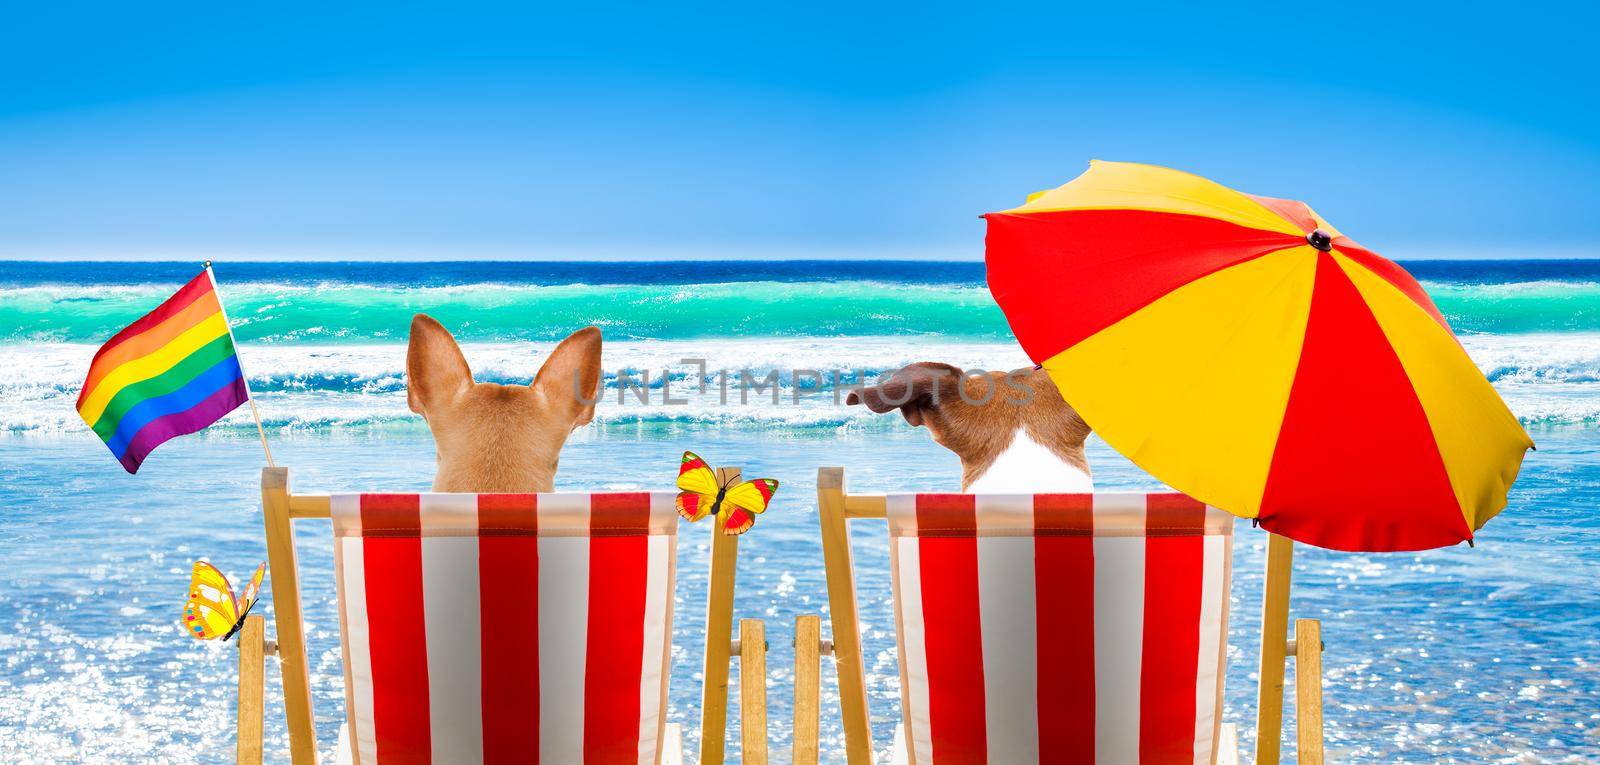 gay dogs relaxing on a beach chair  by Brosch